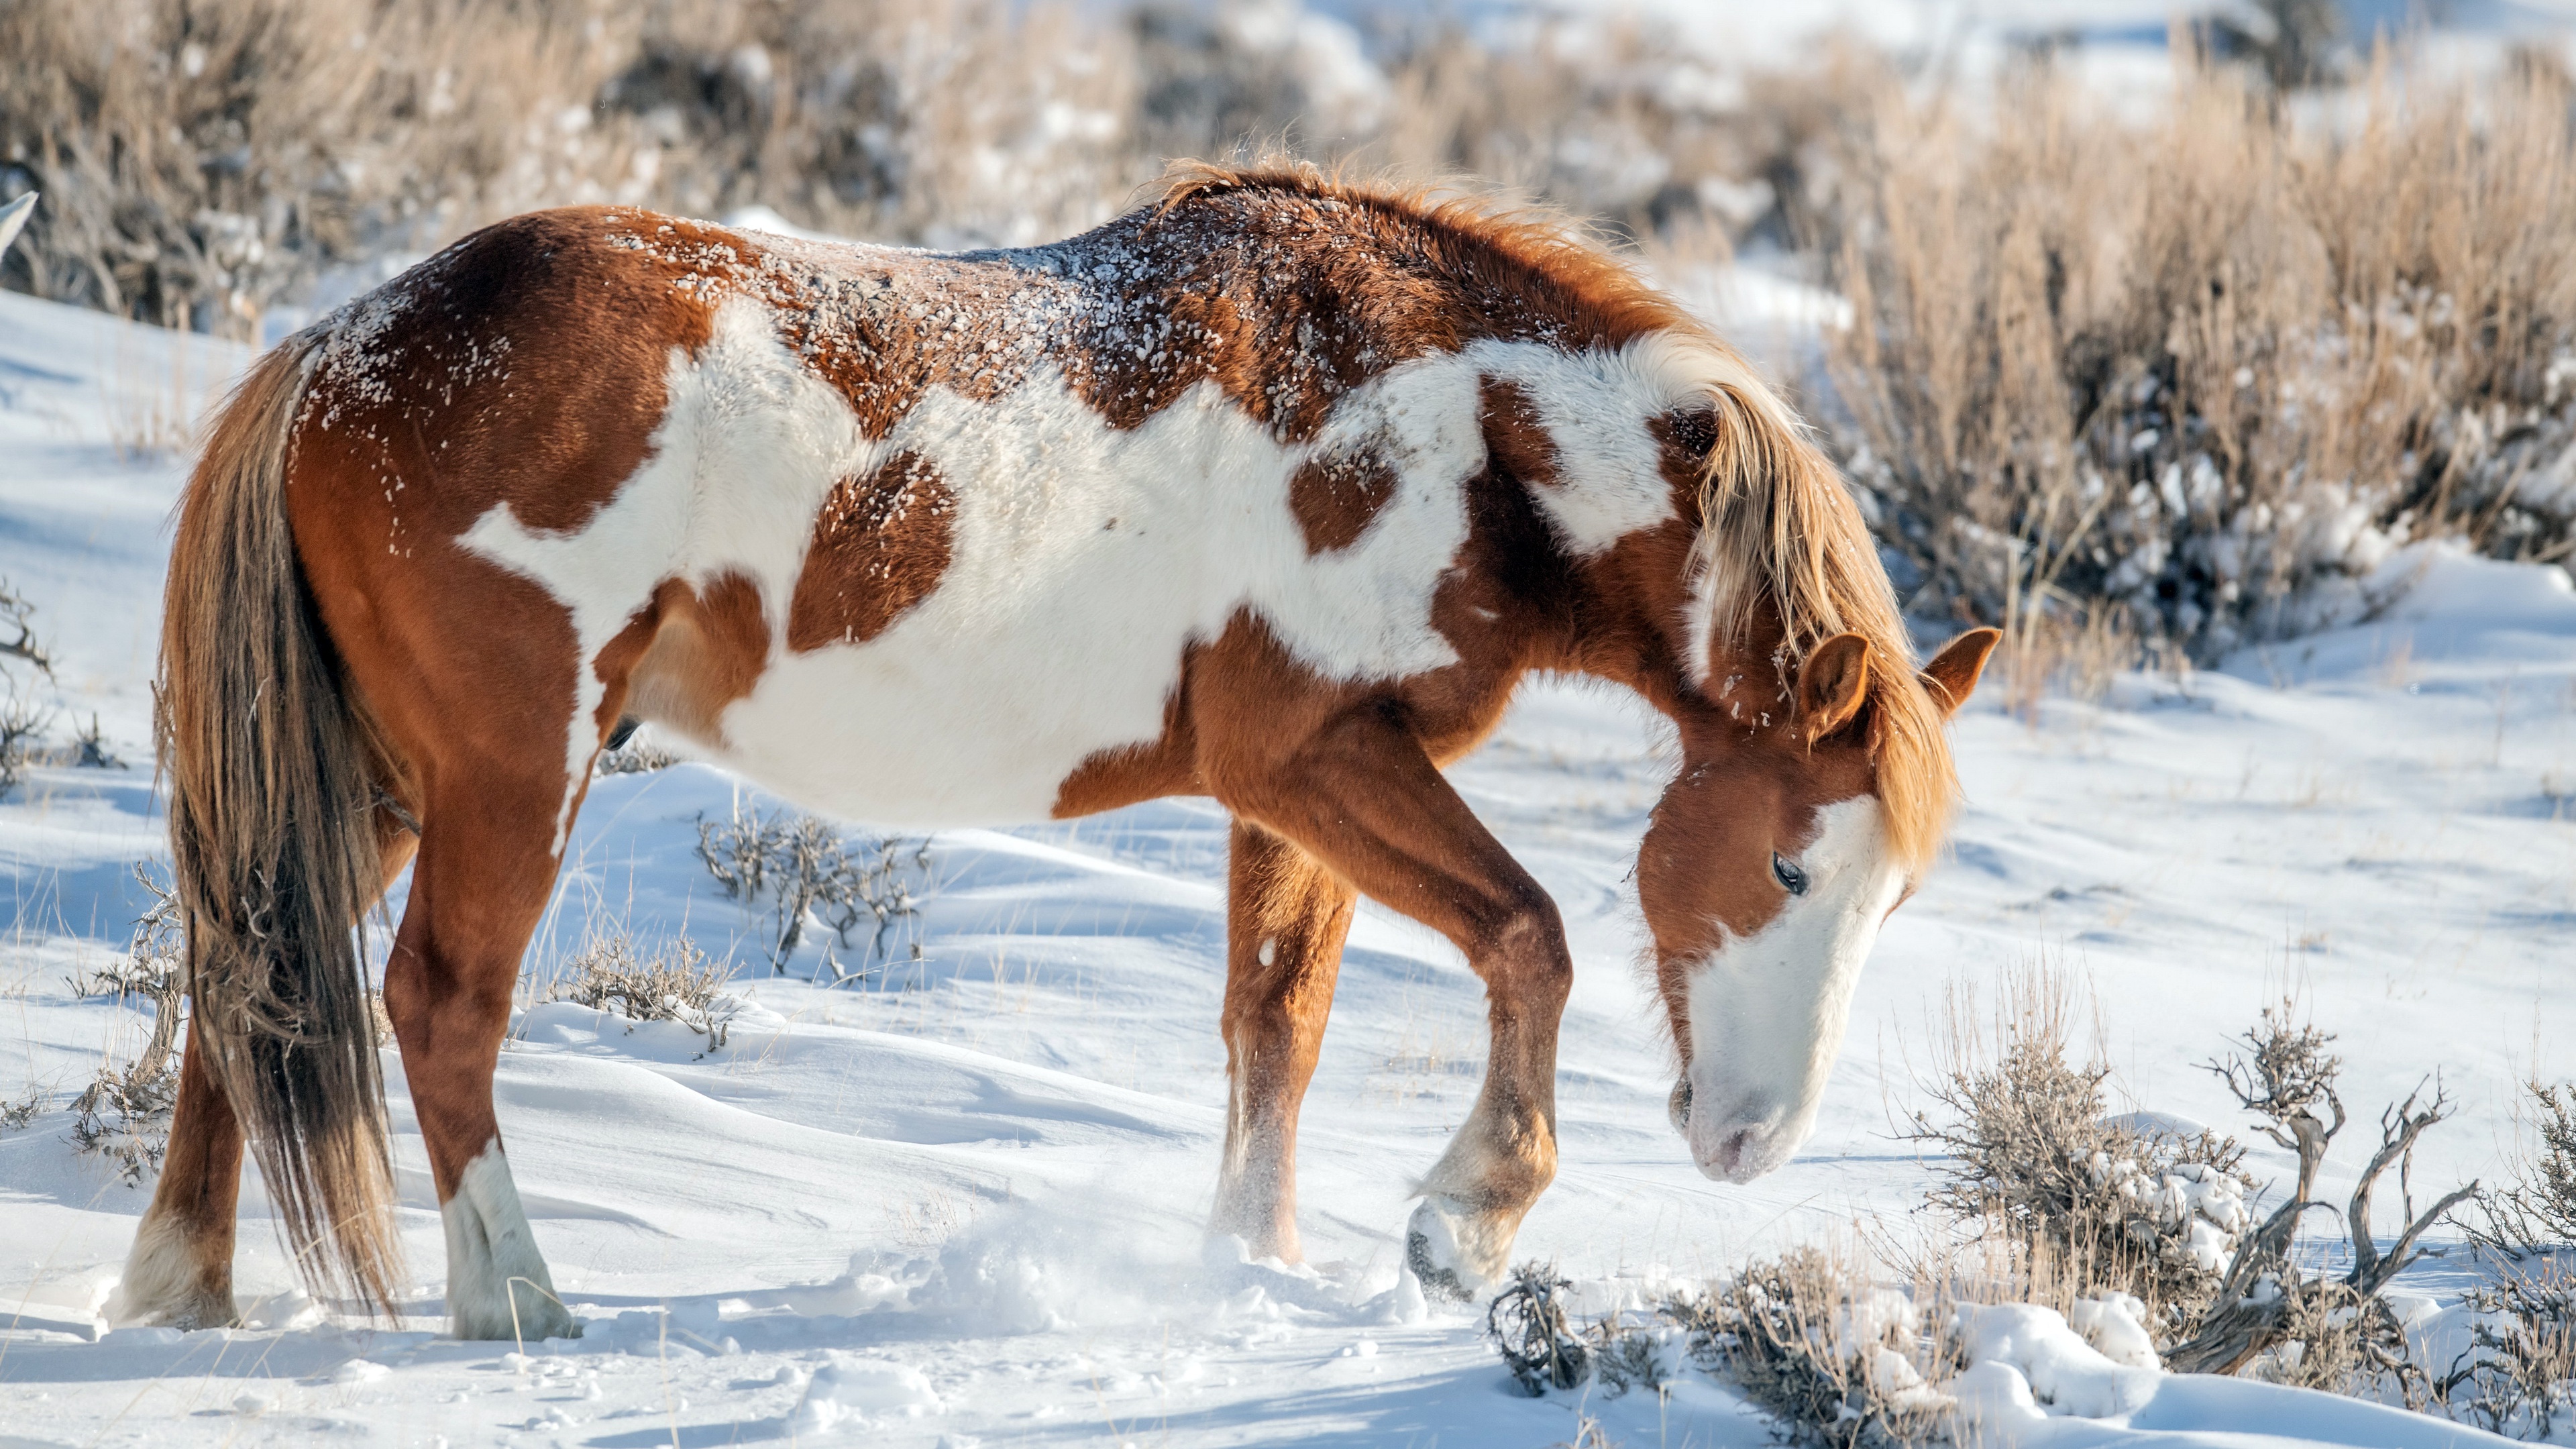 A beautiful well-groomed horse in a snowy field